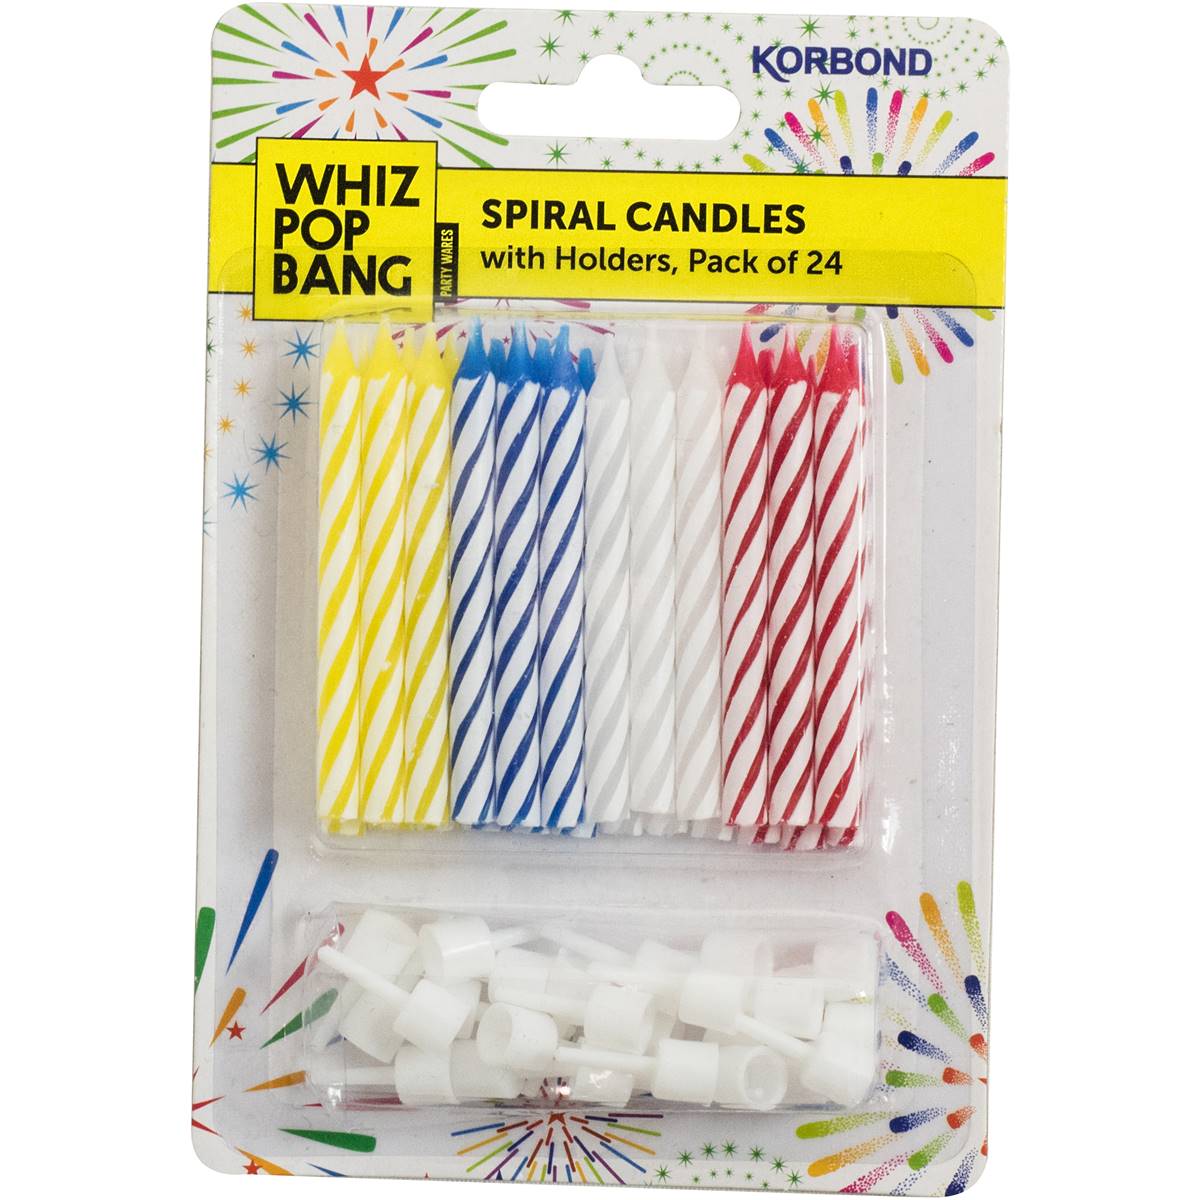 Korbond Birthday Candles Spiral with Holders 24 Pack